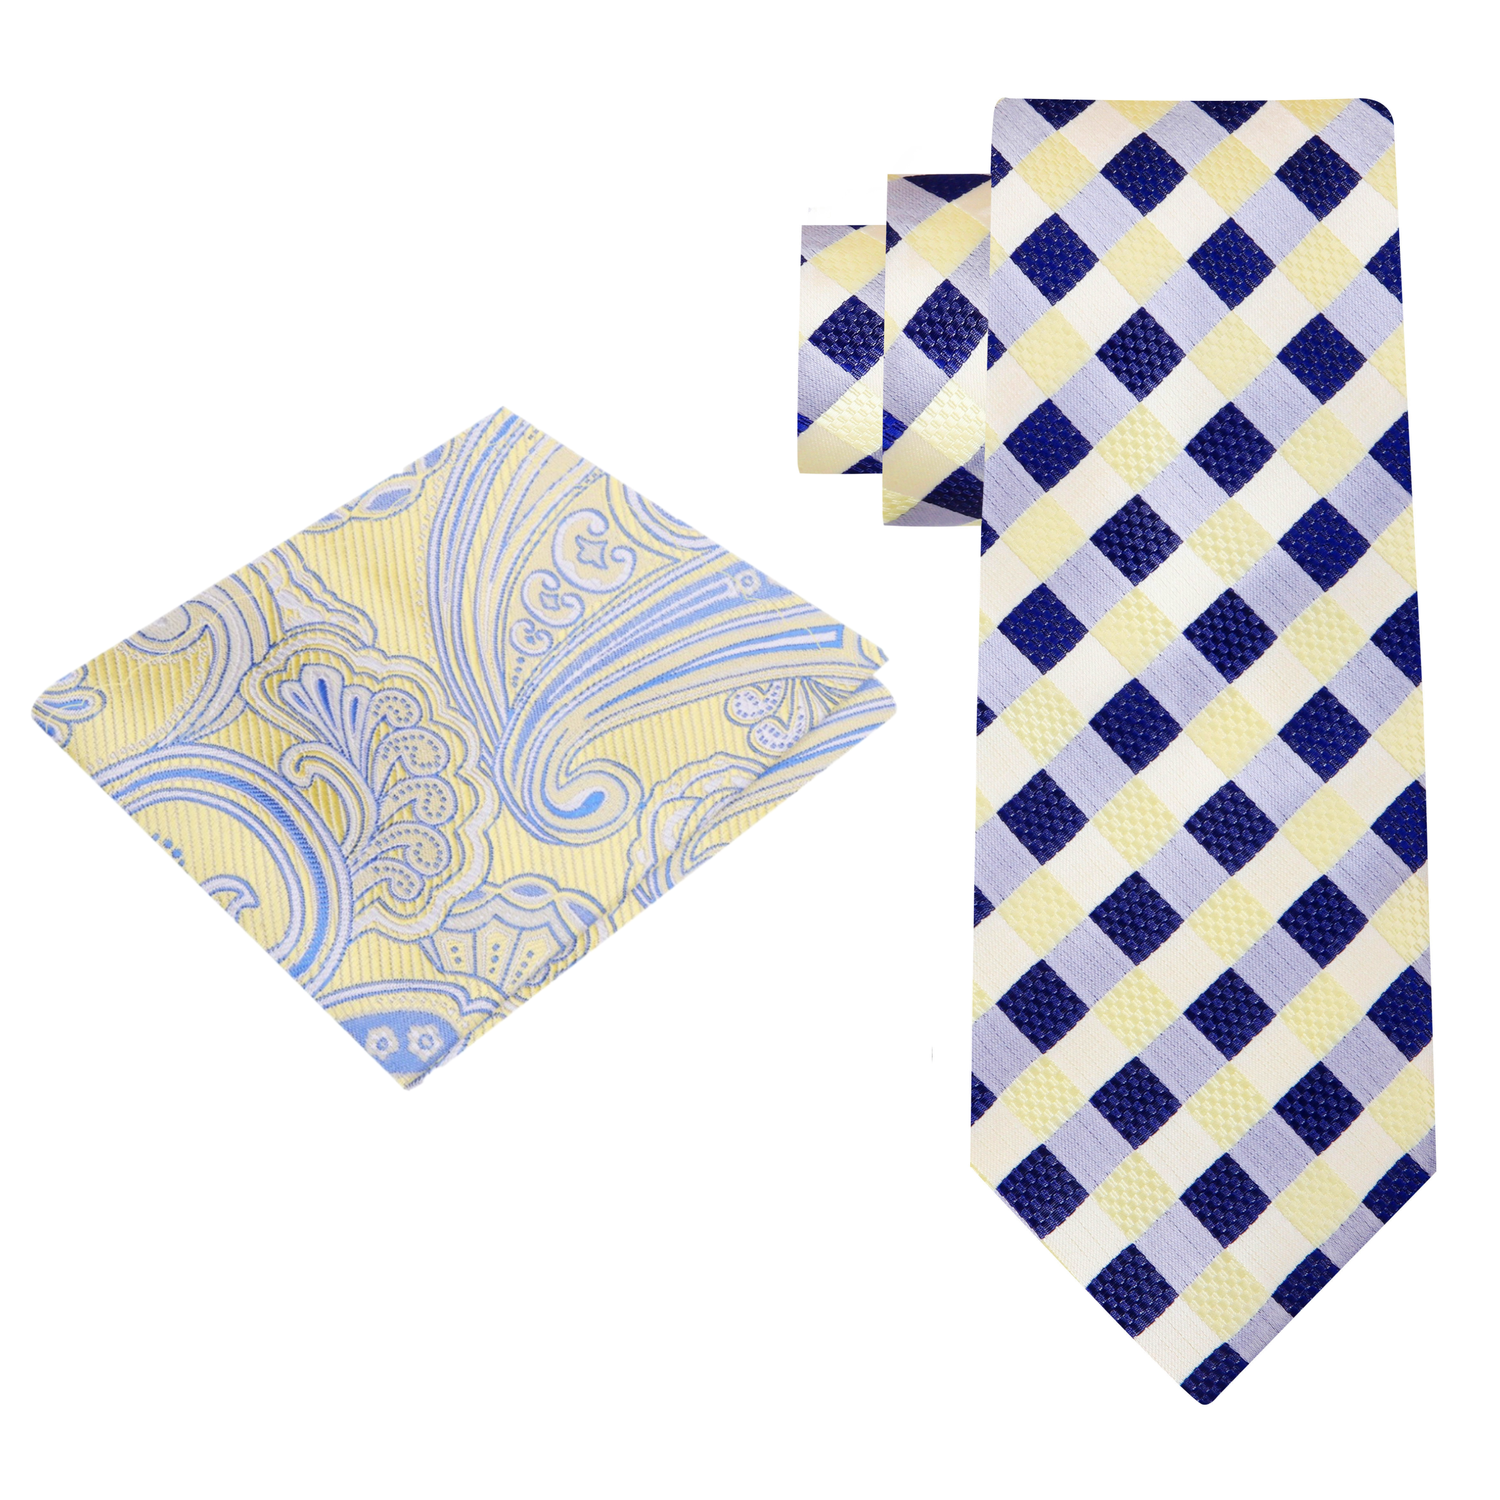 Alt View: Light Yellow, Blue Checker Necktie and Accenting Yellow and Blue Paisley Pocket Square